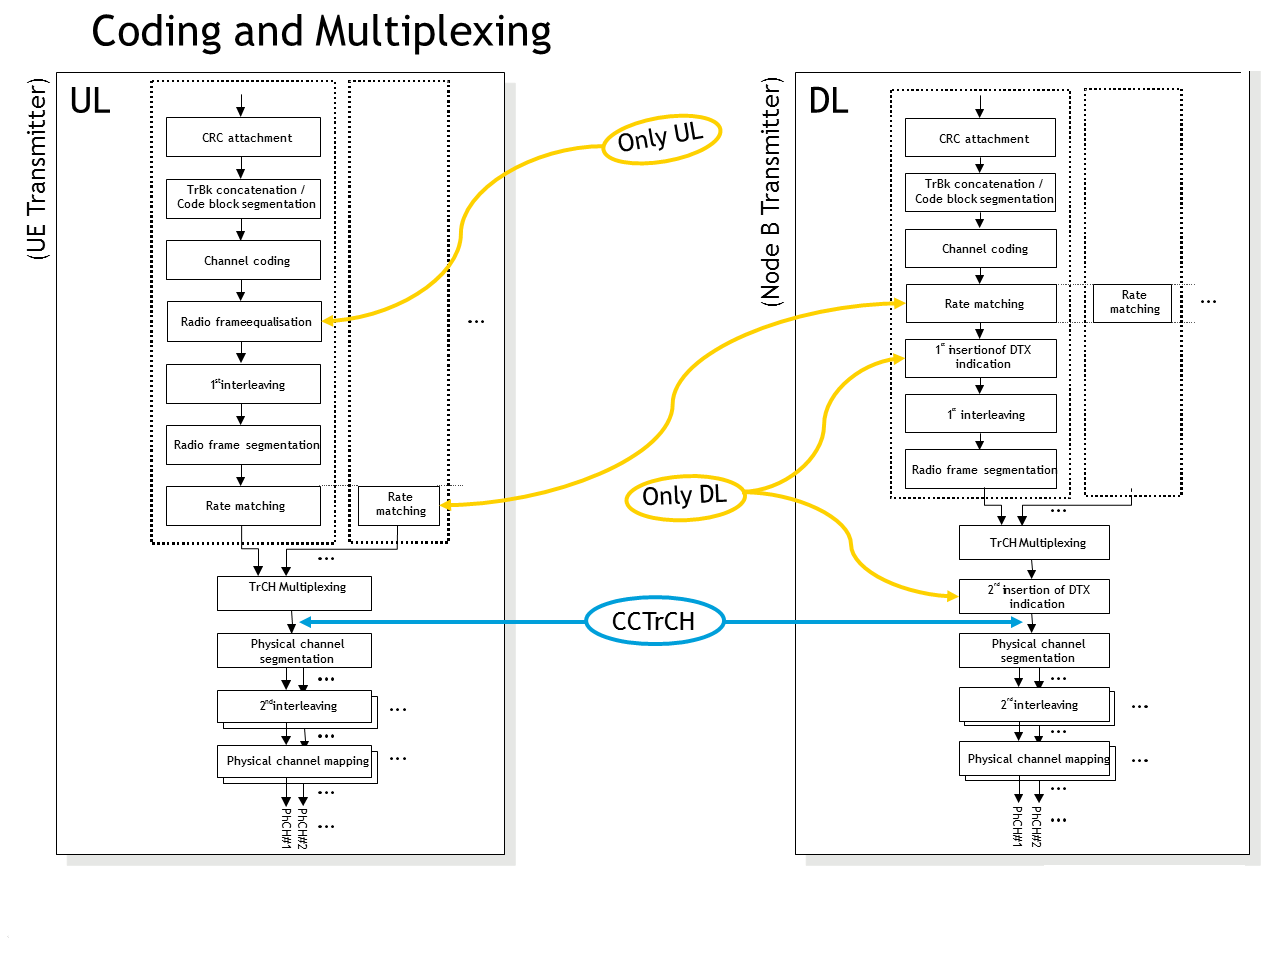 3GPP_R7_Coding_and_Multiplexing